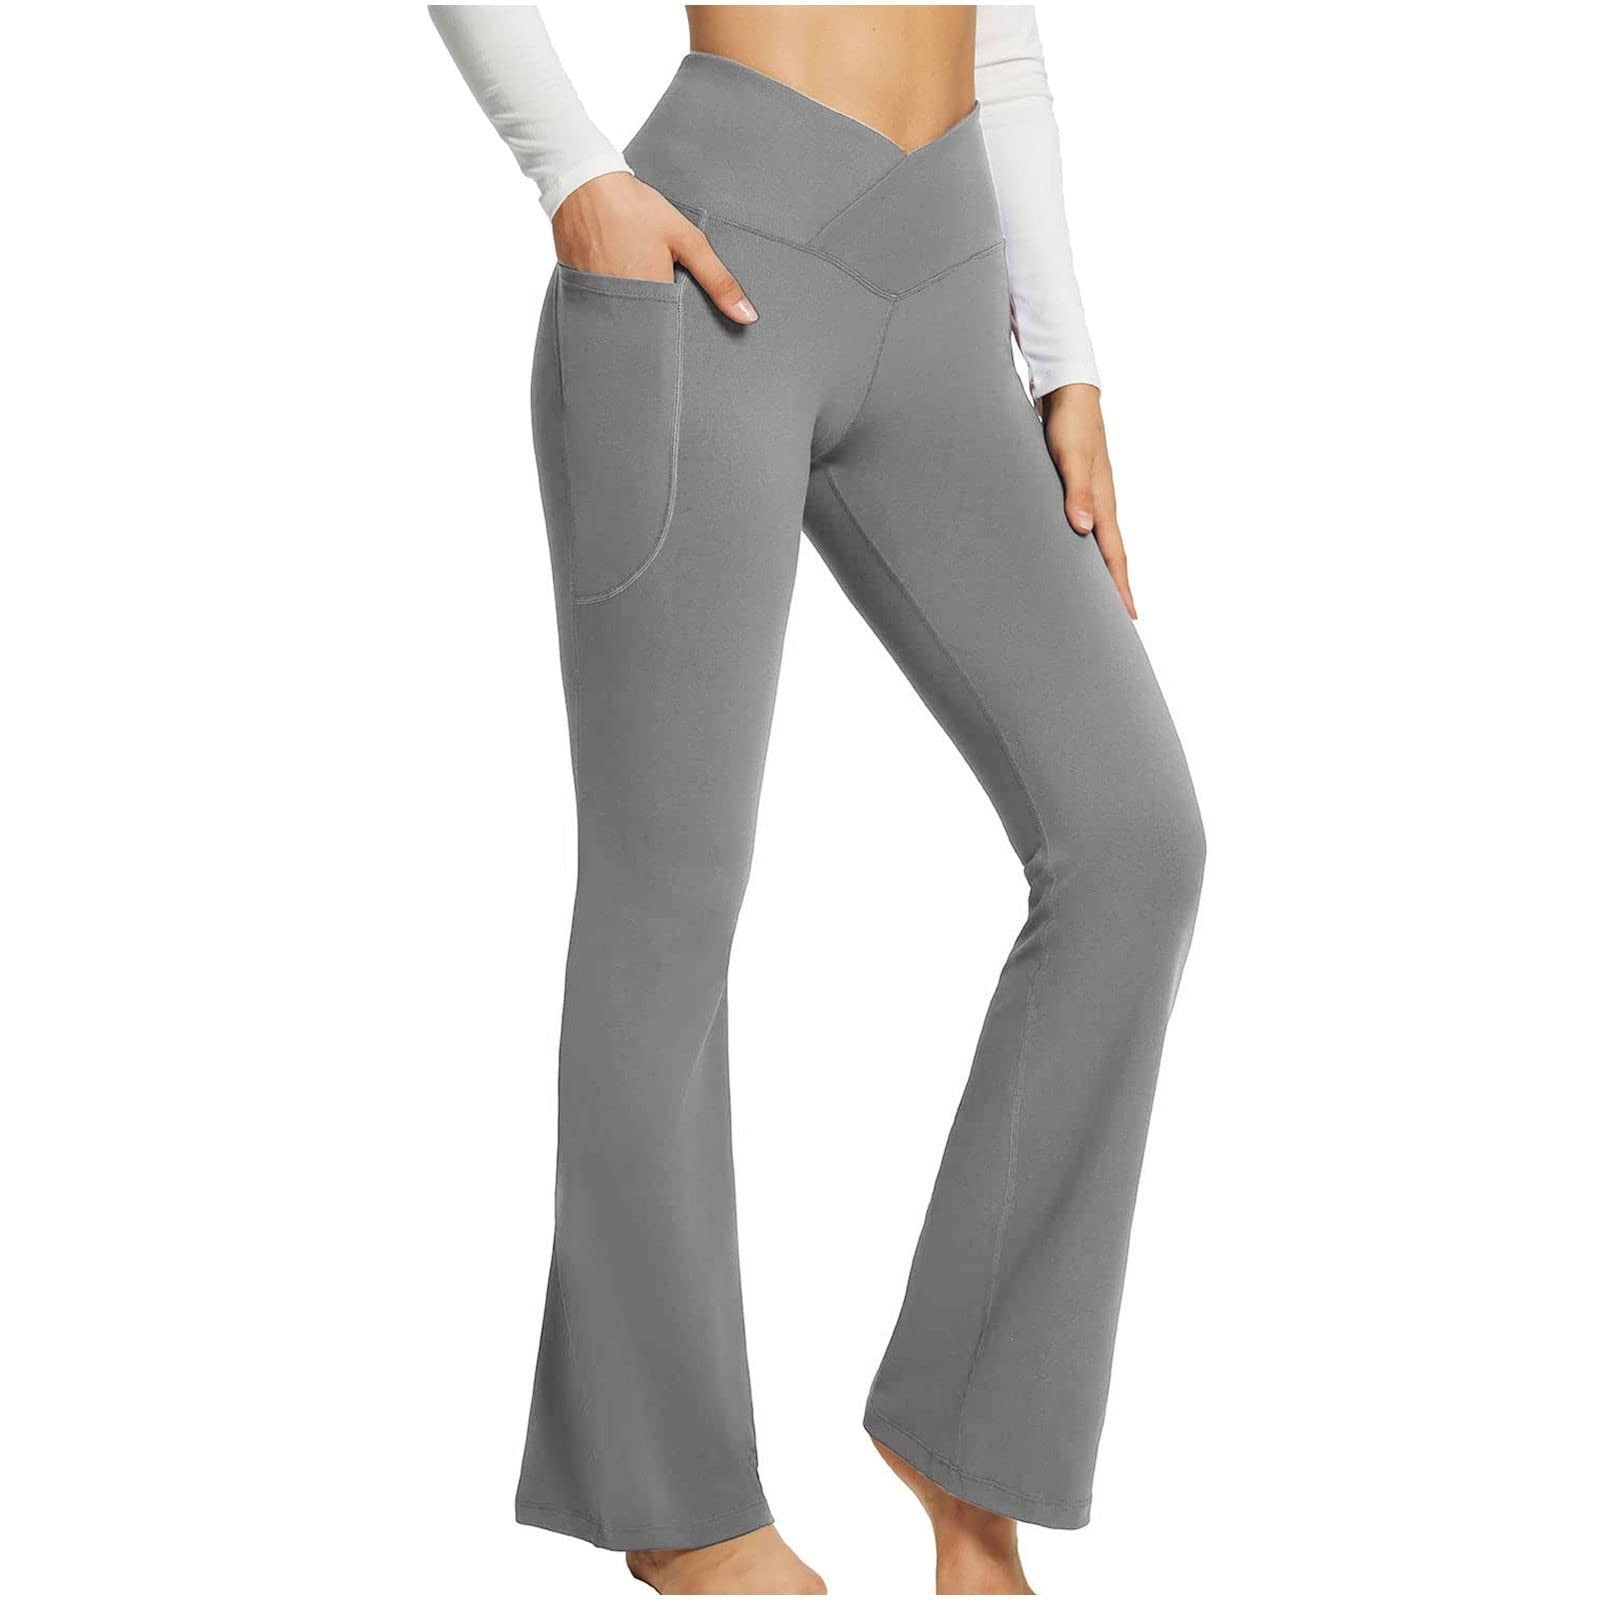 Up 50% off! Leggings for Women, Yoga Pants with Pockets for Women, Bell  Bottom Leggings, Grey Leggings for Women, Soft Leggings for Women, Long Yoga  Pants for Women Tall, Girls Flare 